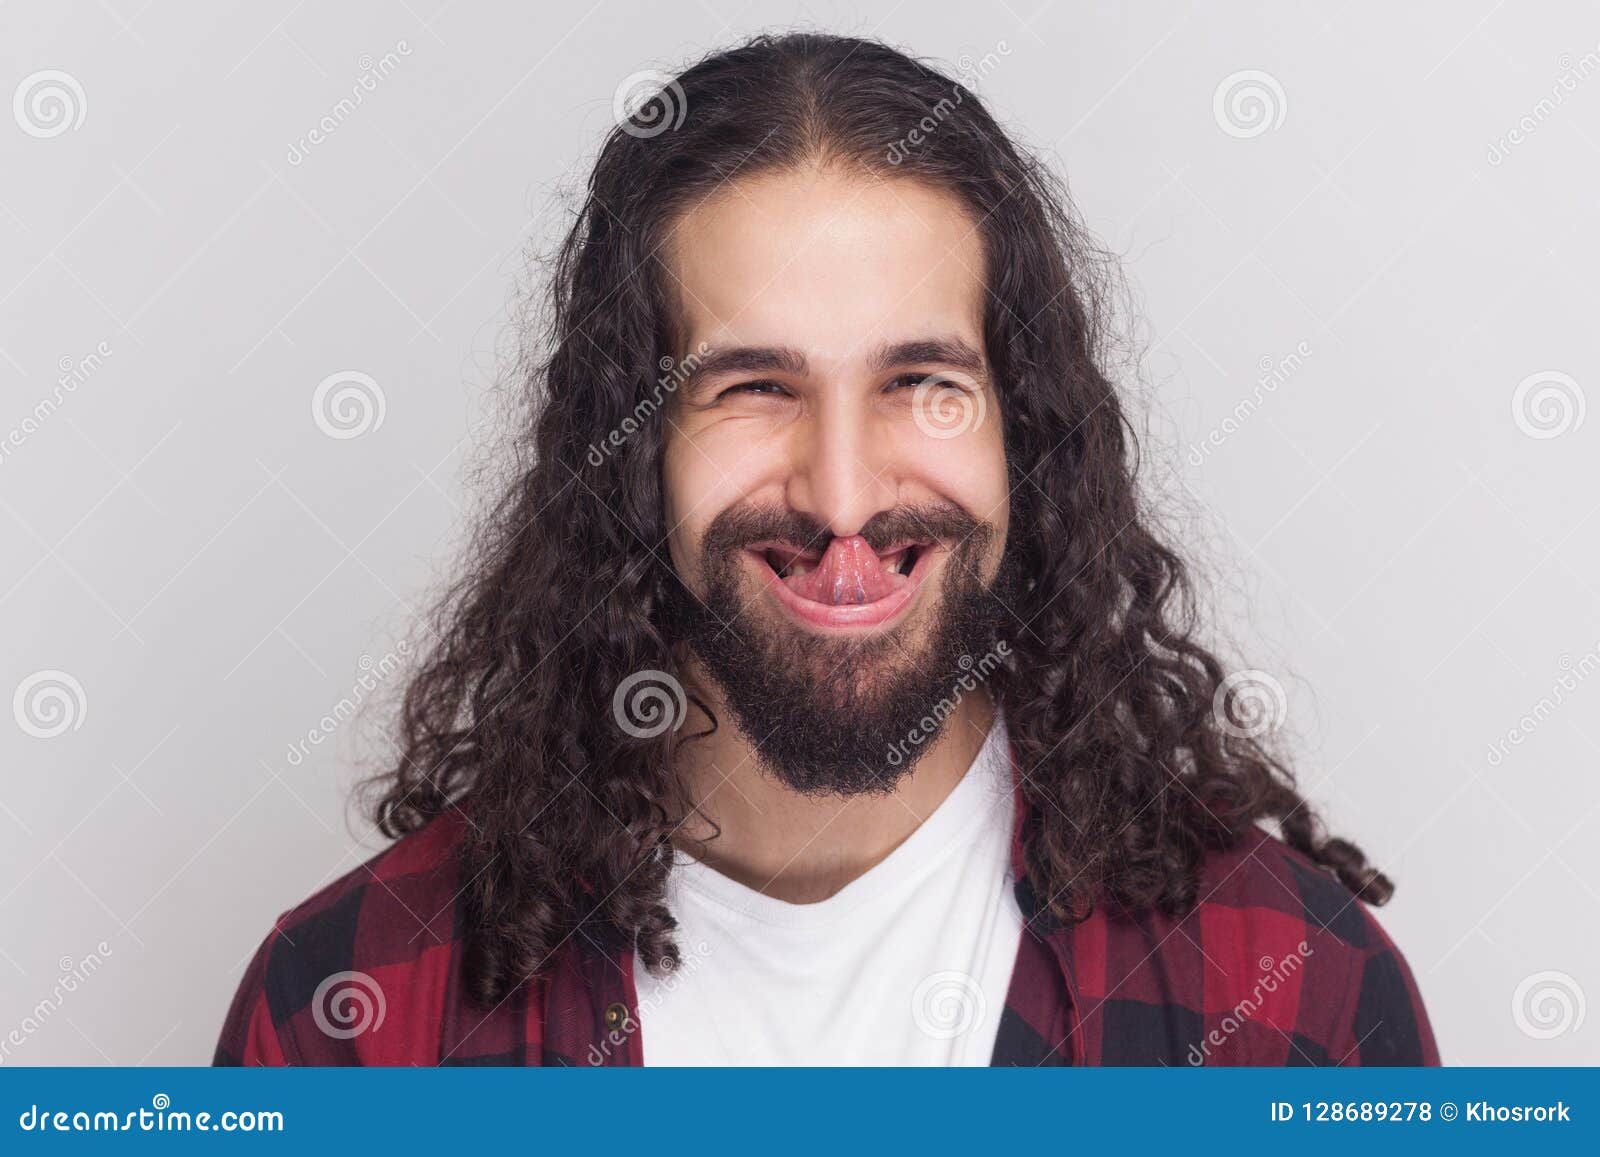 Funny Crazy Brunette Man With Beard And Black Long Curly Hair In